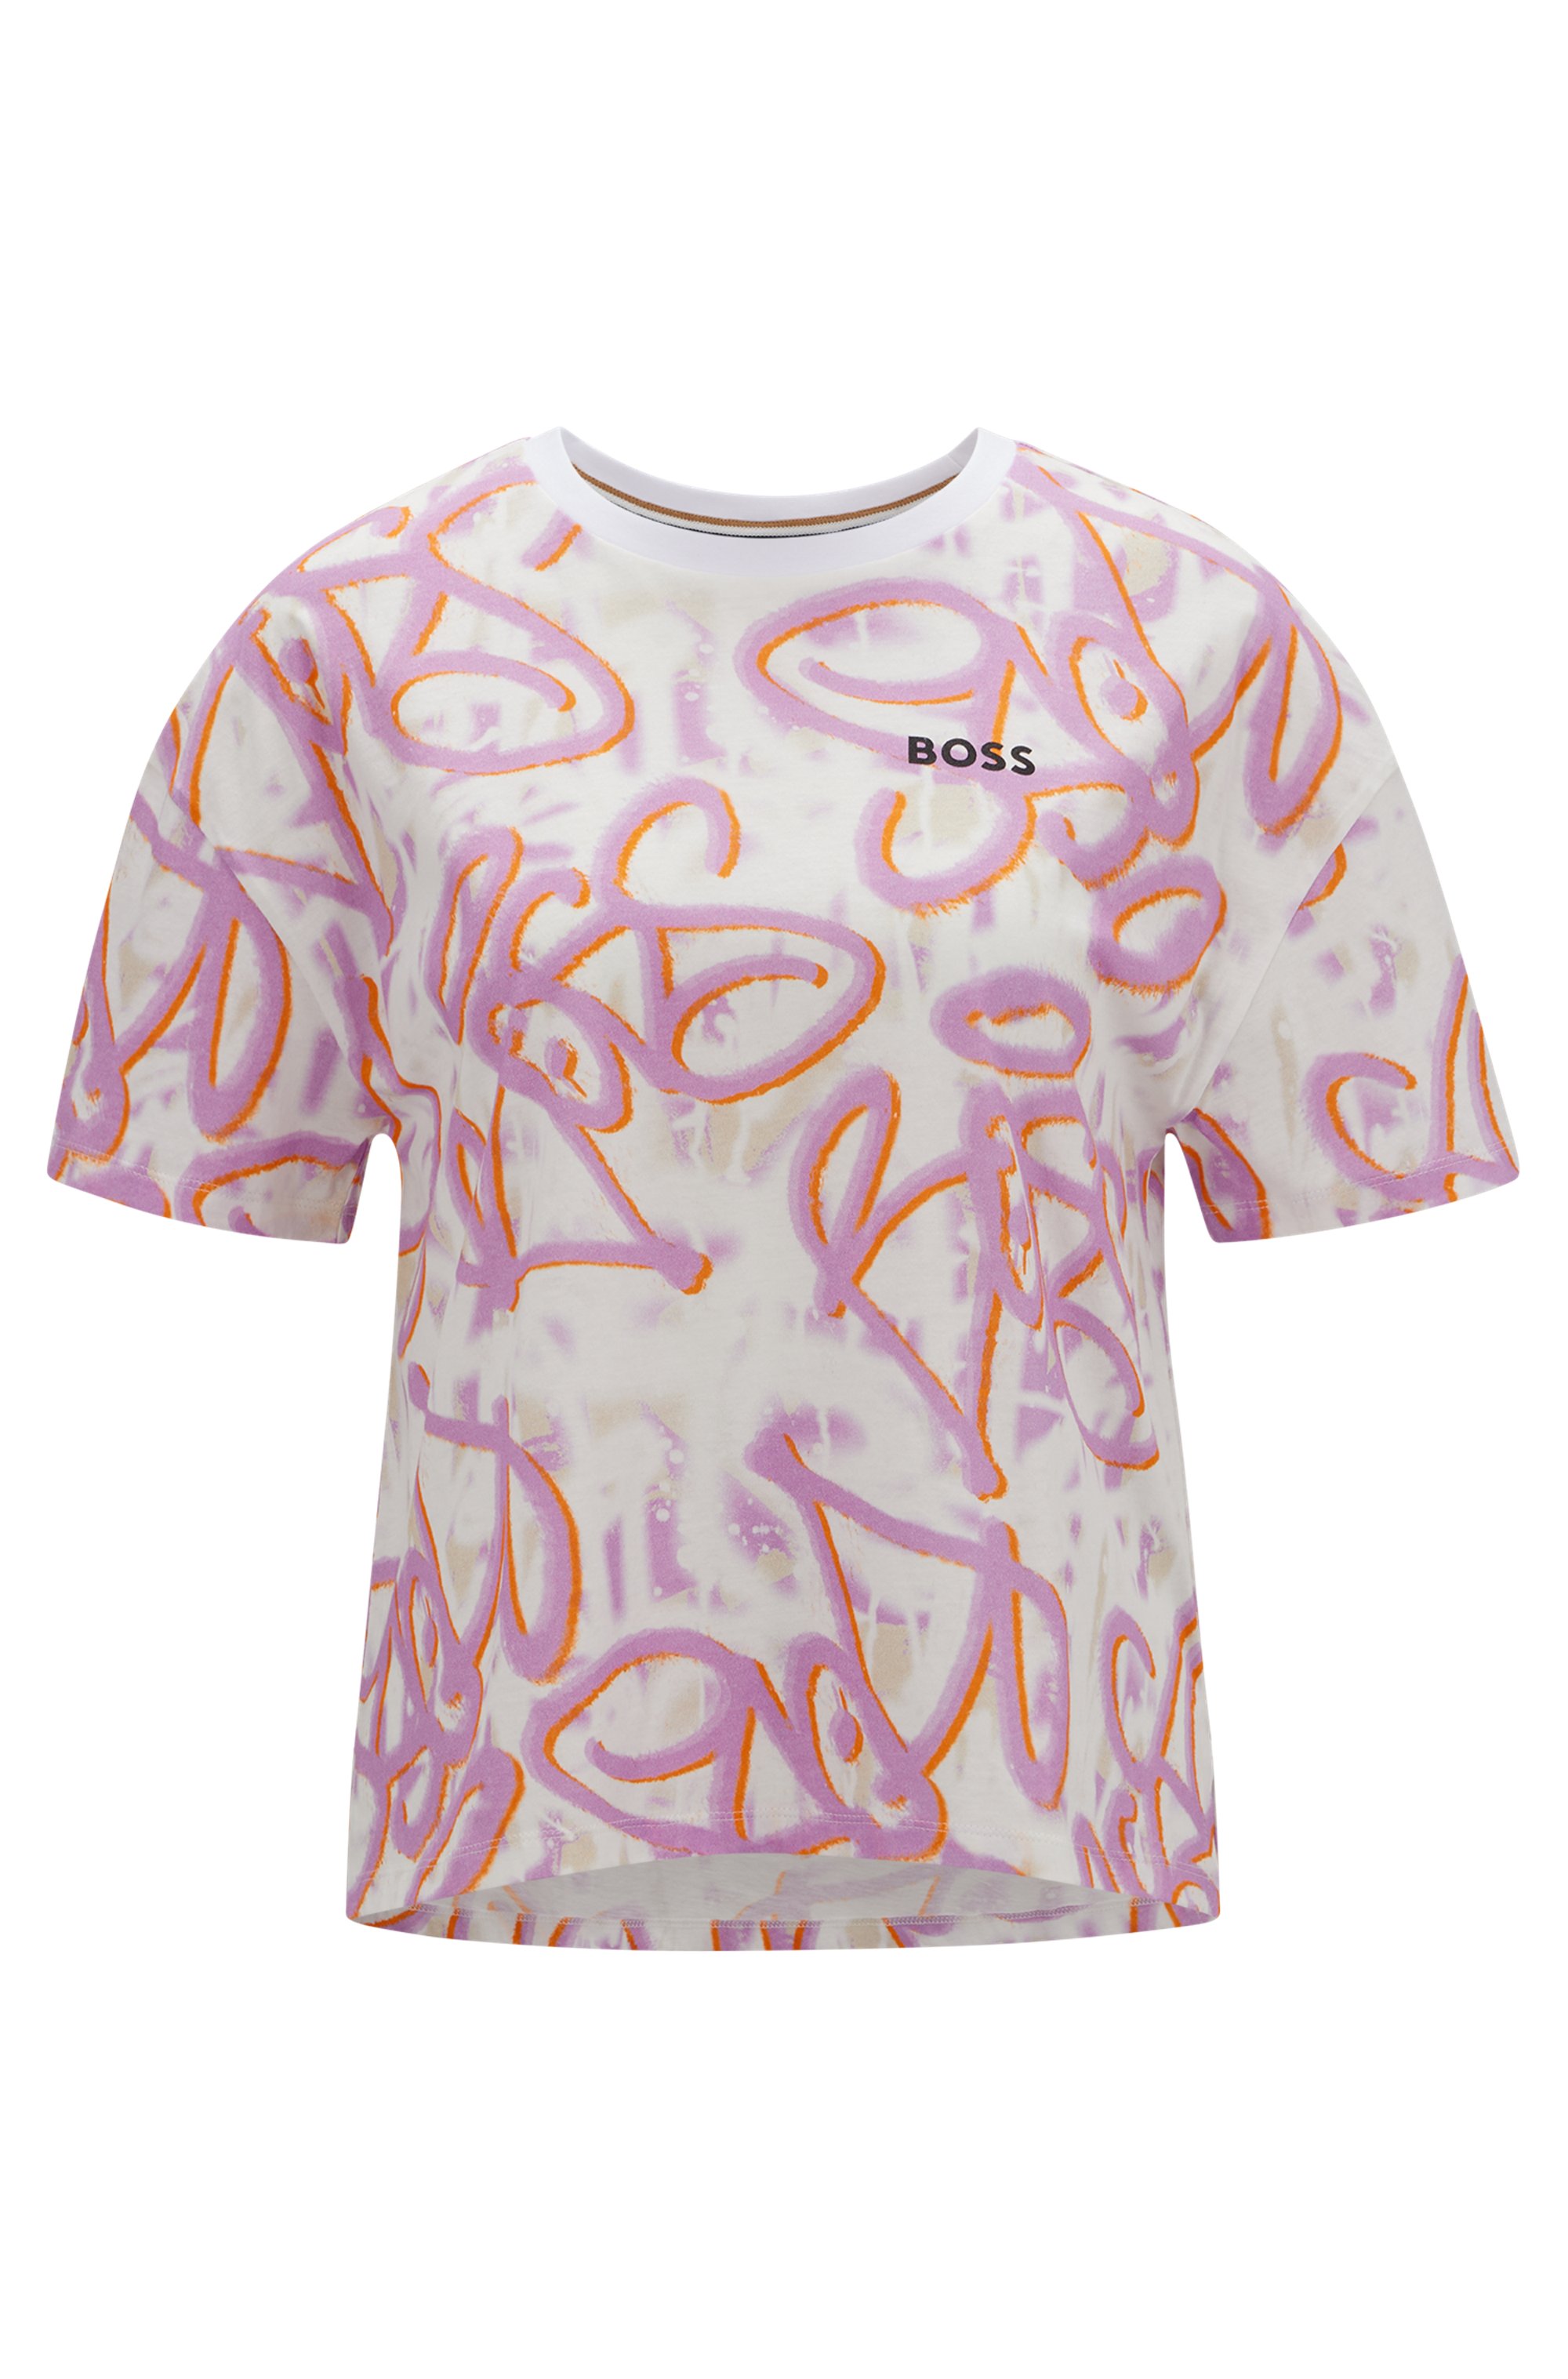 Relaxed-fit cotton-jersey T-shirt with graffiti-style artwork, Patterned